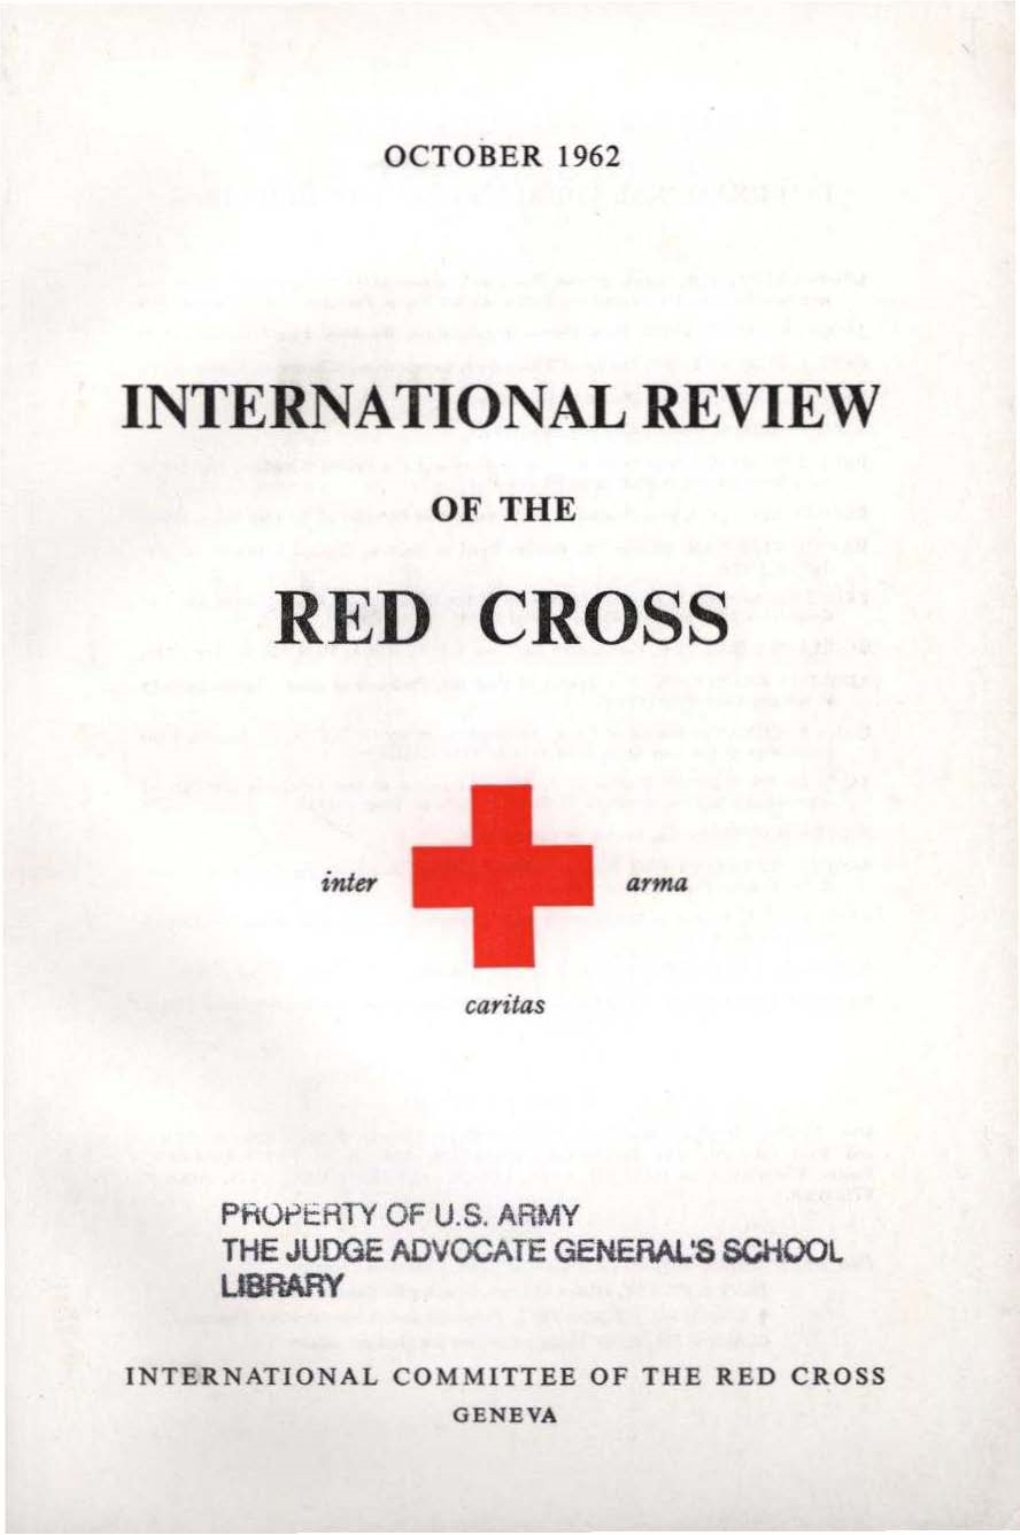 International Review of the Red Cross, October 1962, Second Year